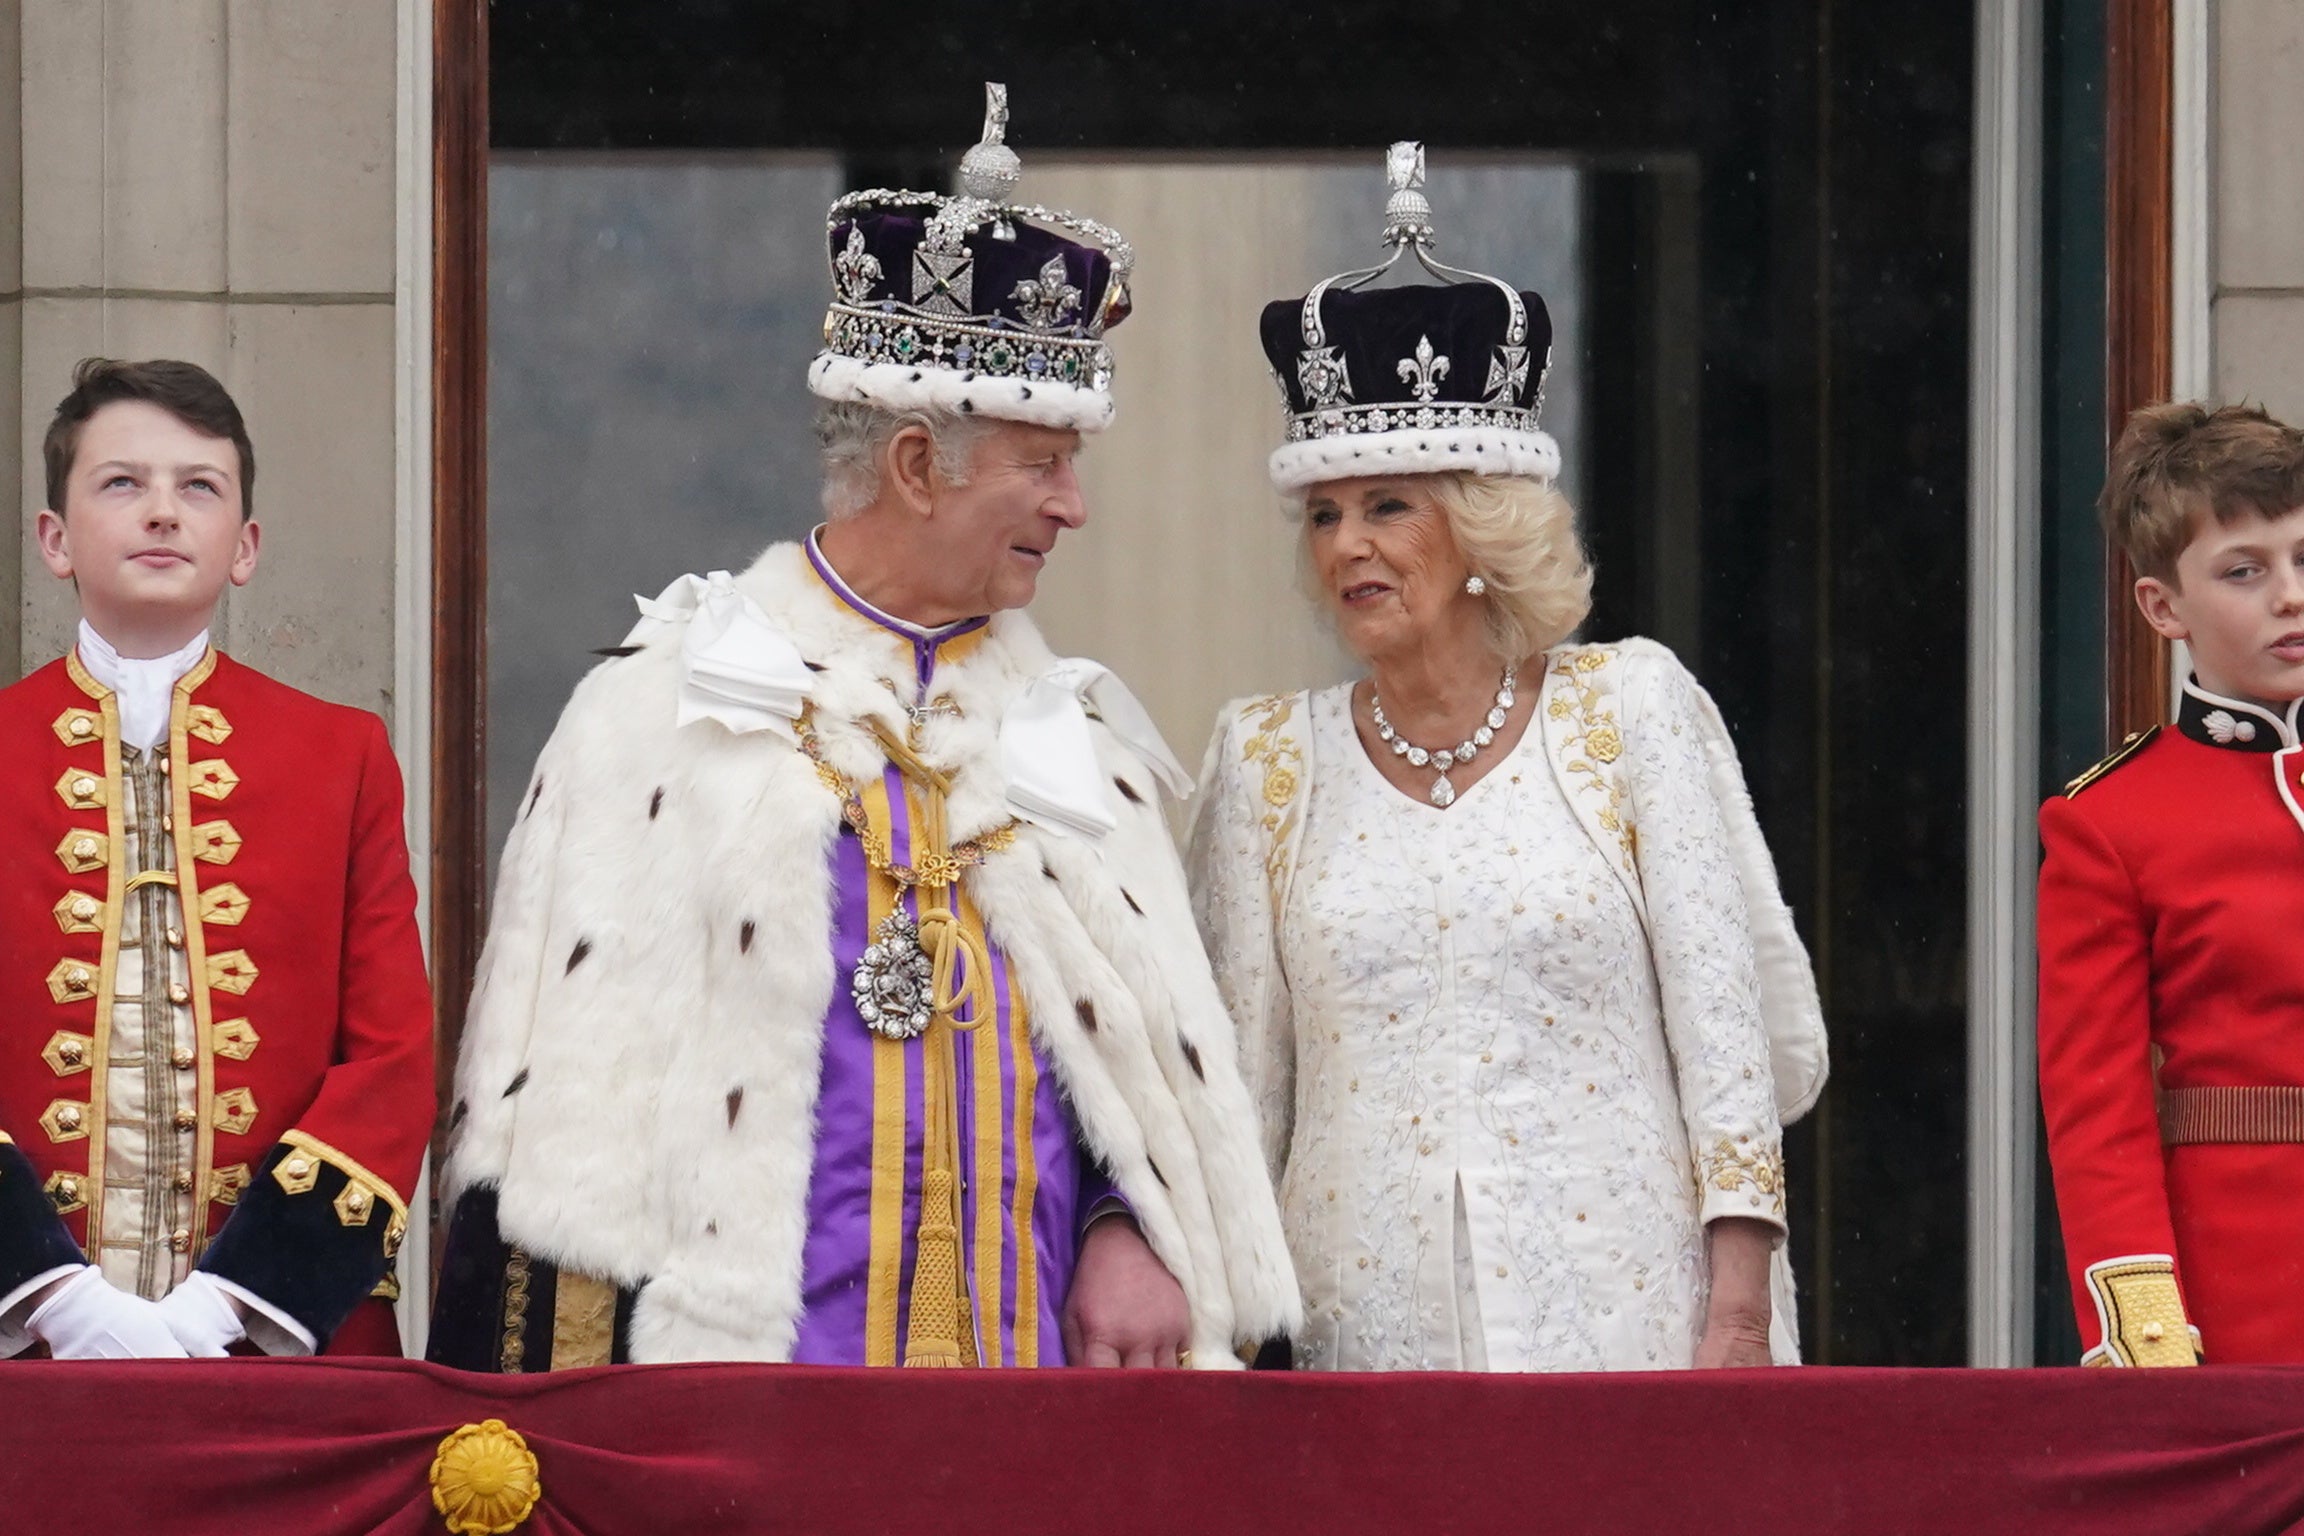 King Charles and Queen Camilla share a few words as they appear to crowds outside Buckingham Palace